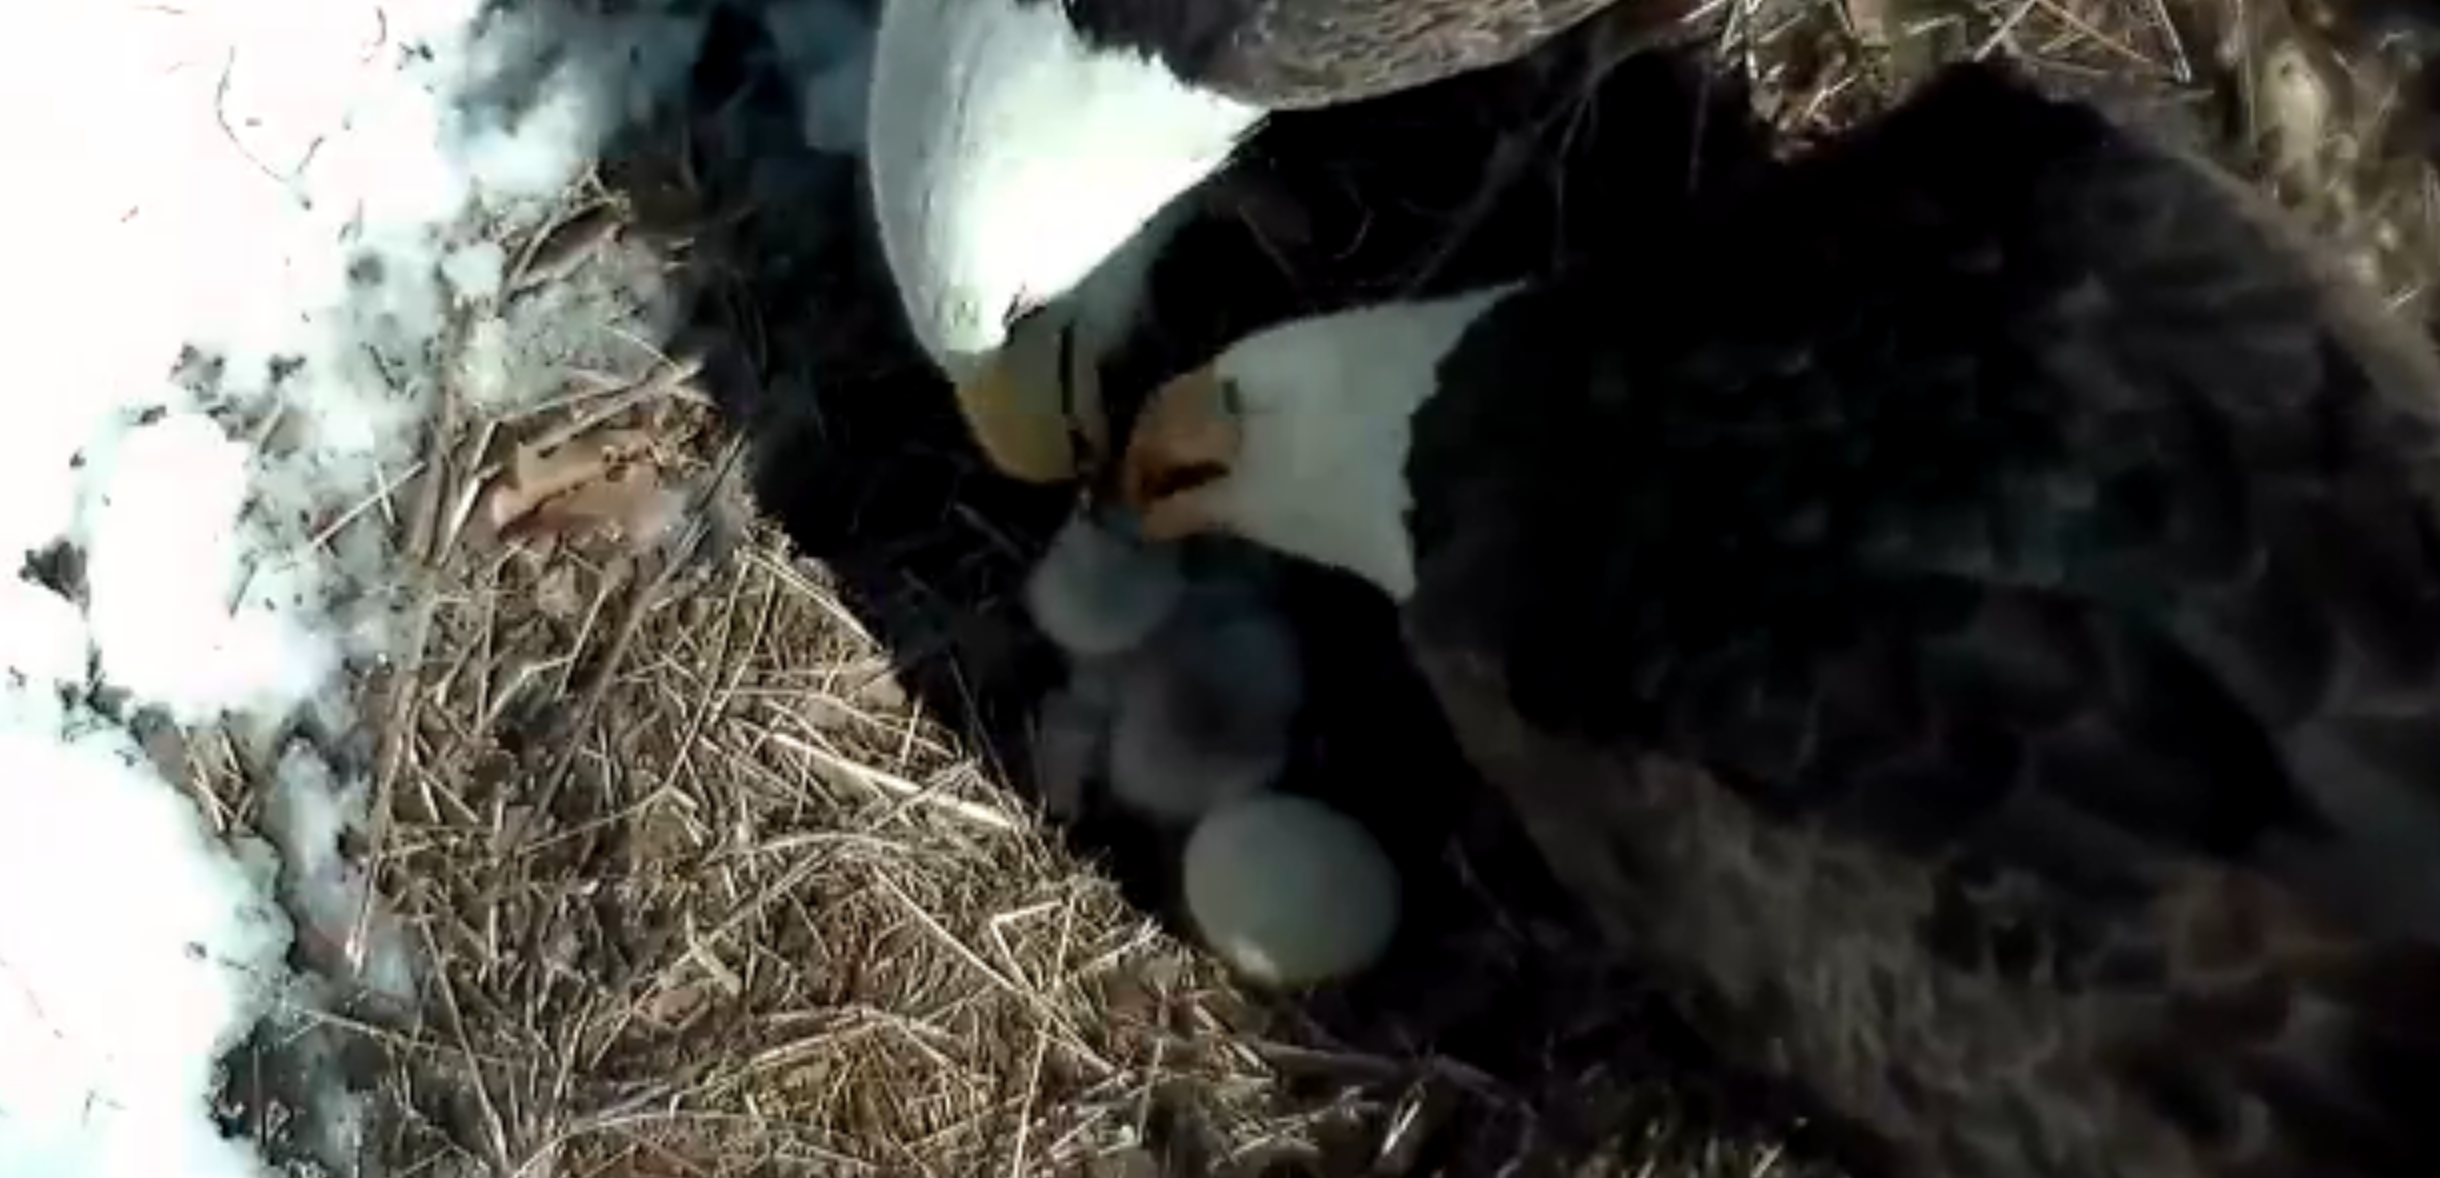 Hays%20eaglet%20fed%20by%20parents